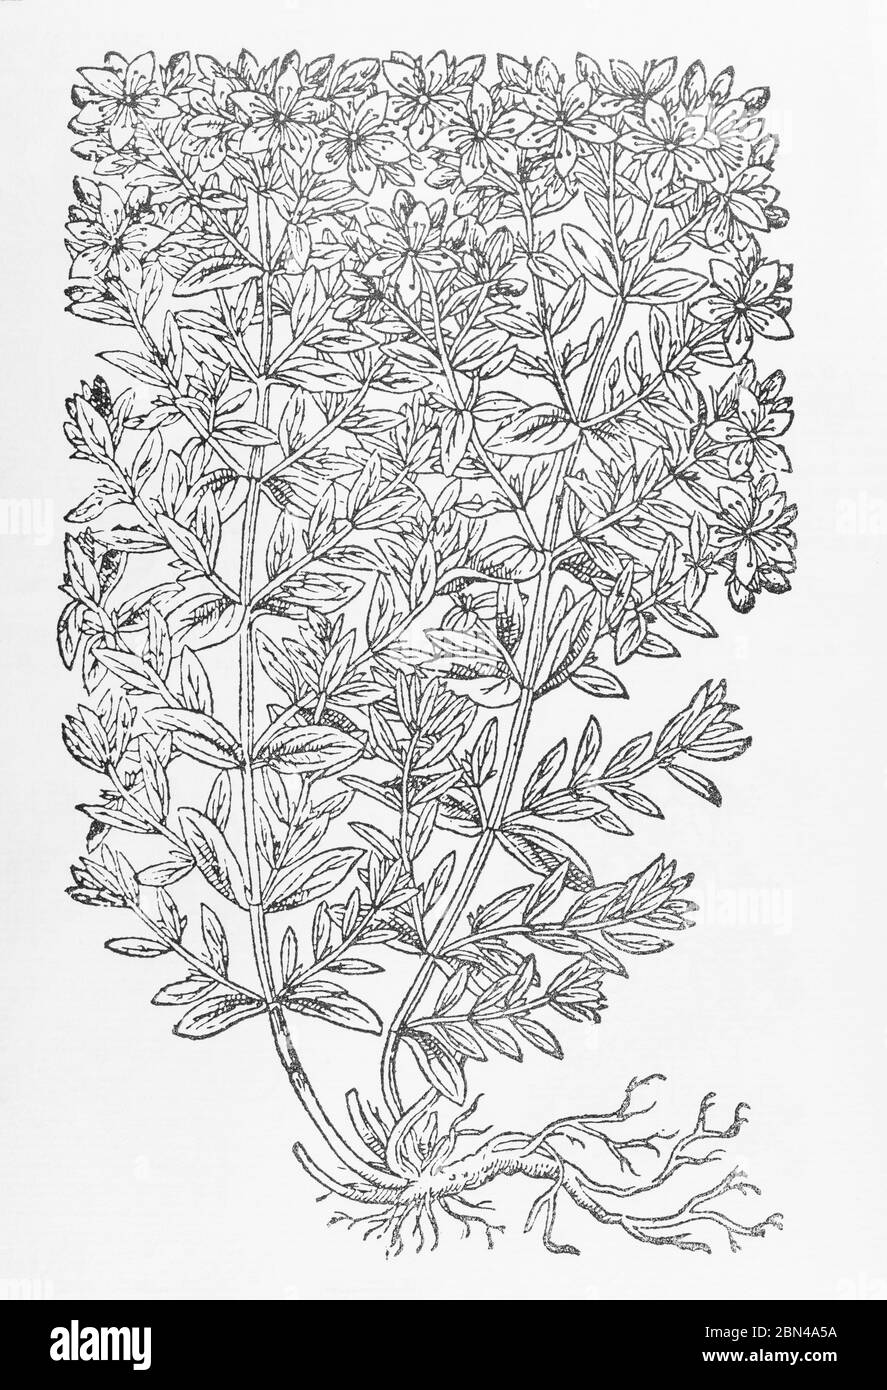 St. Johns Wort / Hypericum perforatum plant woodcut from Gerarde's Herball, History of Plants. P432. Well known herbal medicinal plant. Stock Photo